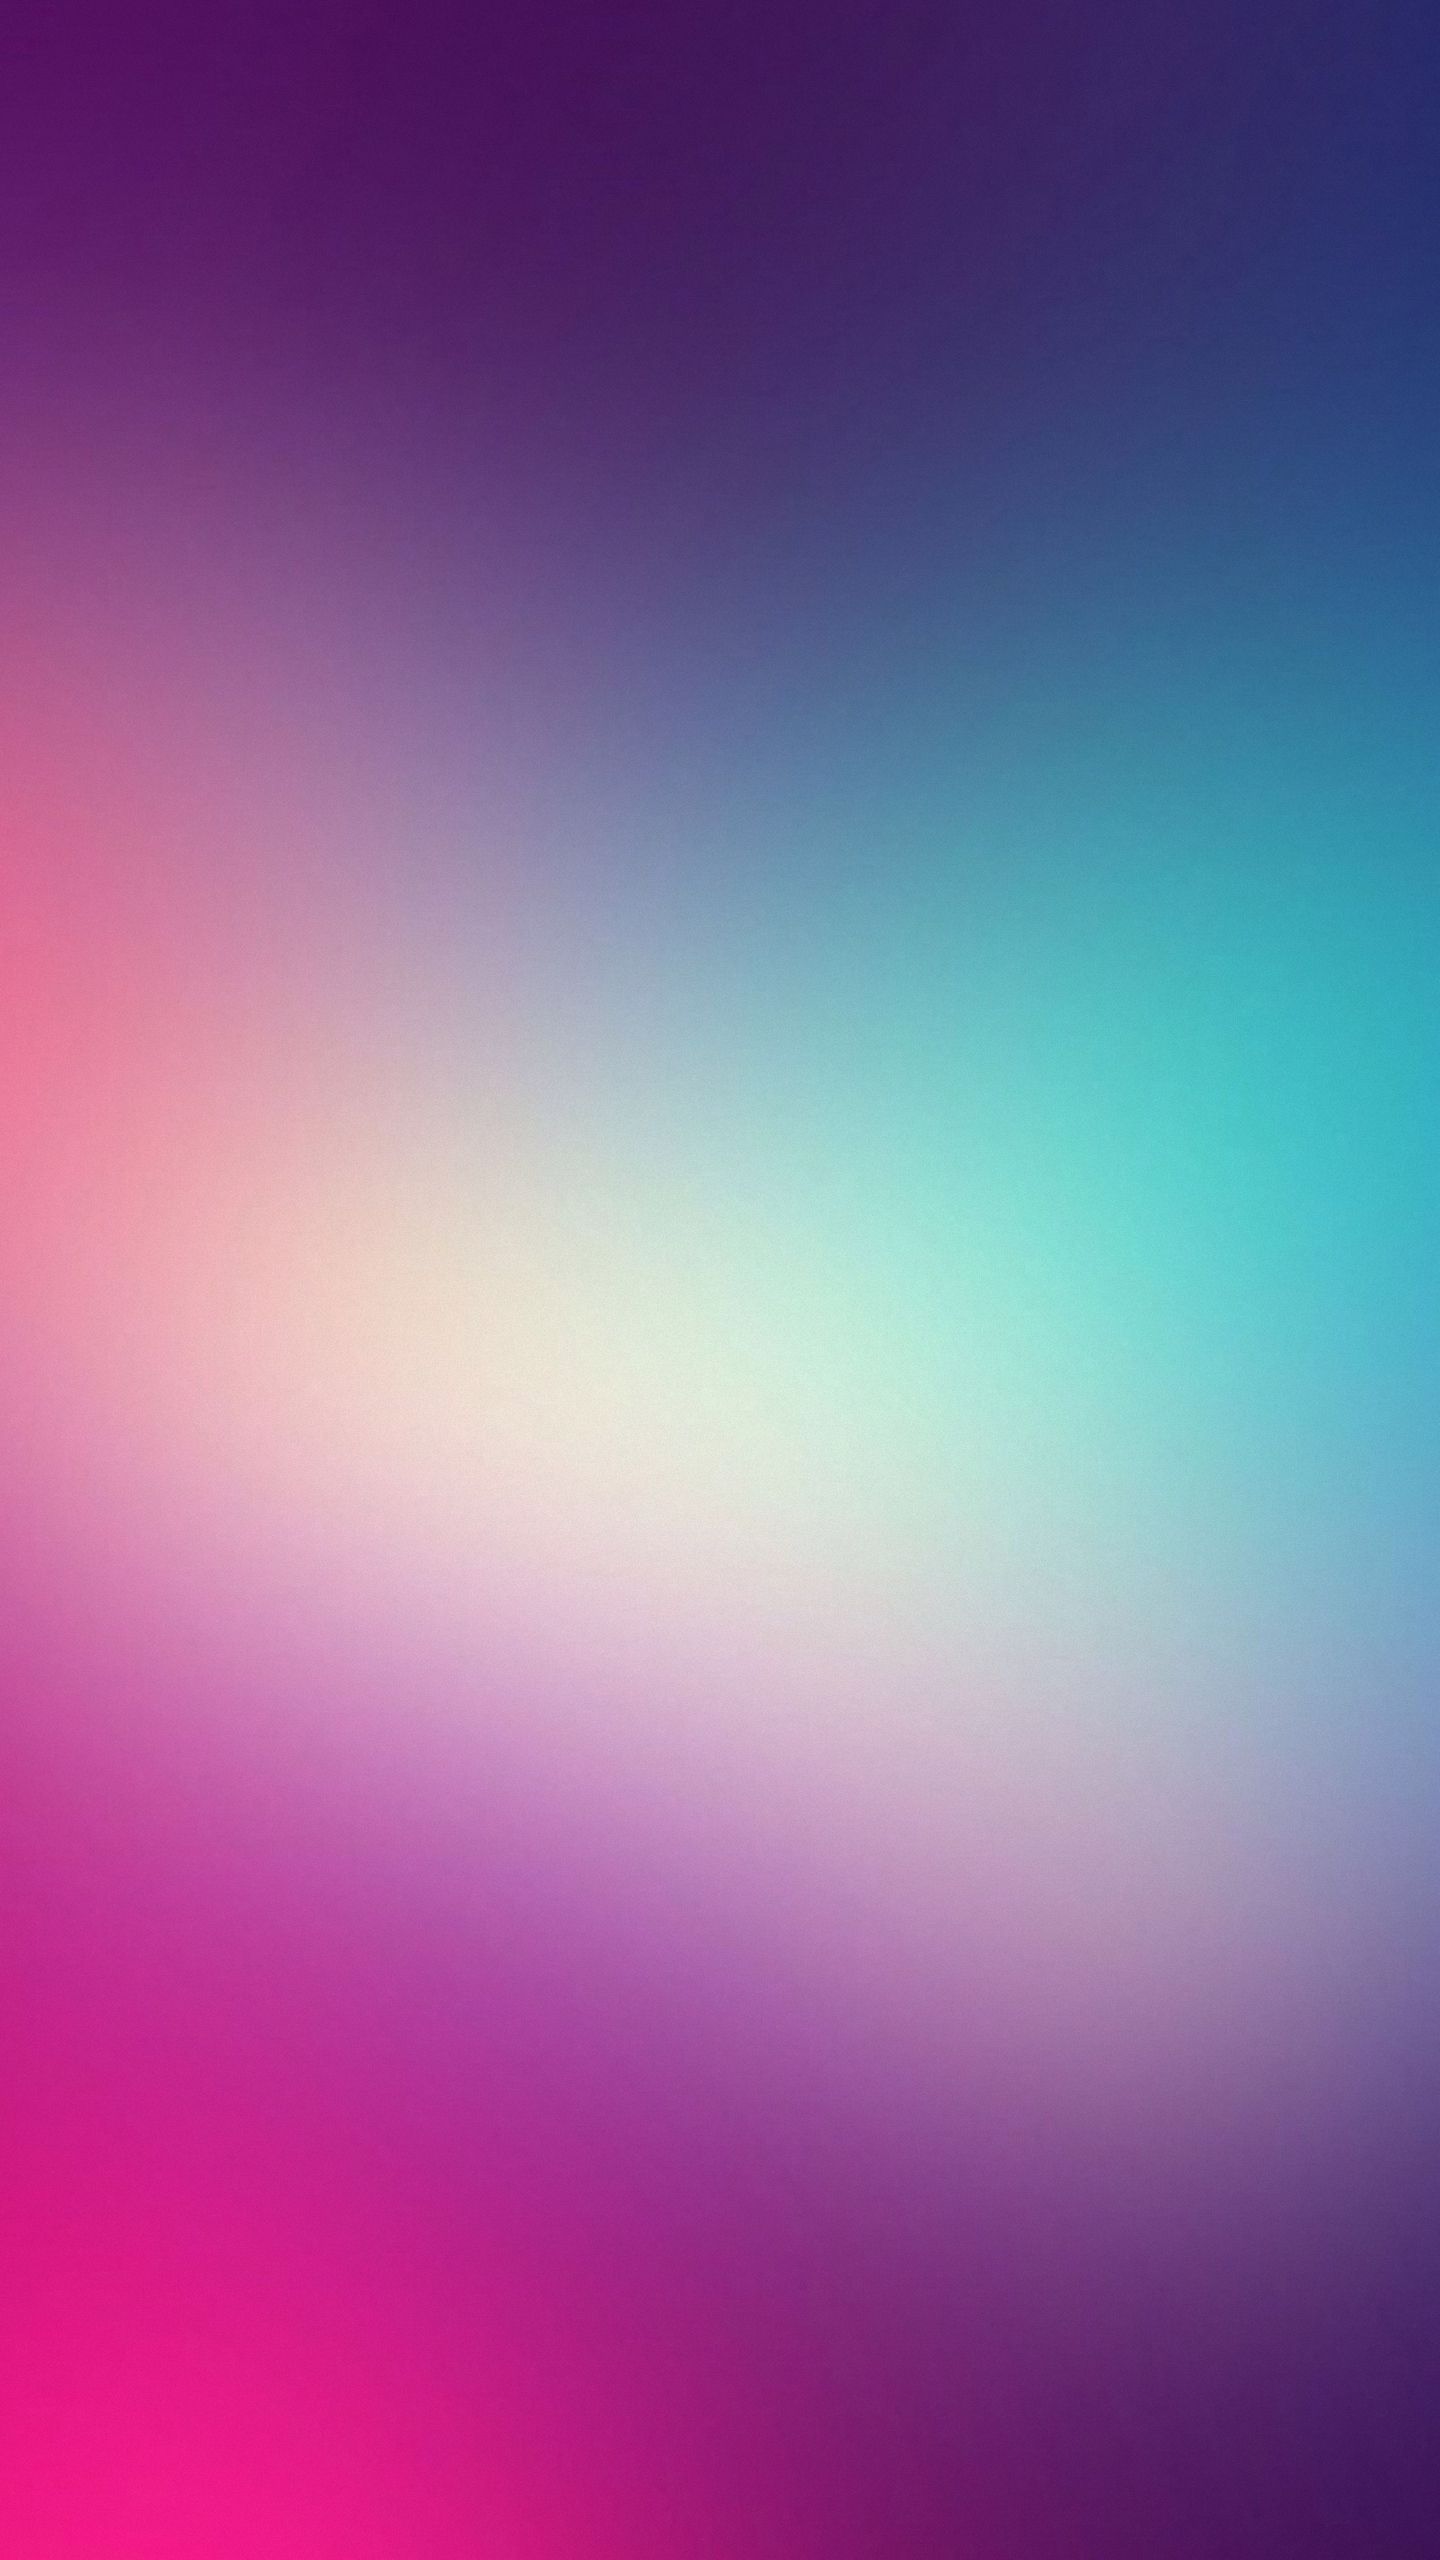 Free download iPhone 6s Blur Simple Wallpapers HD iPhones